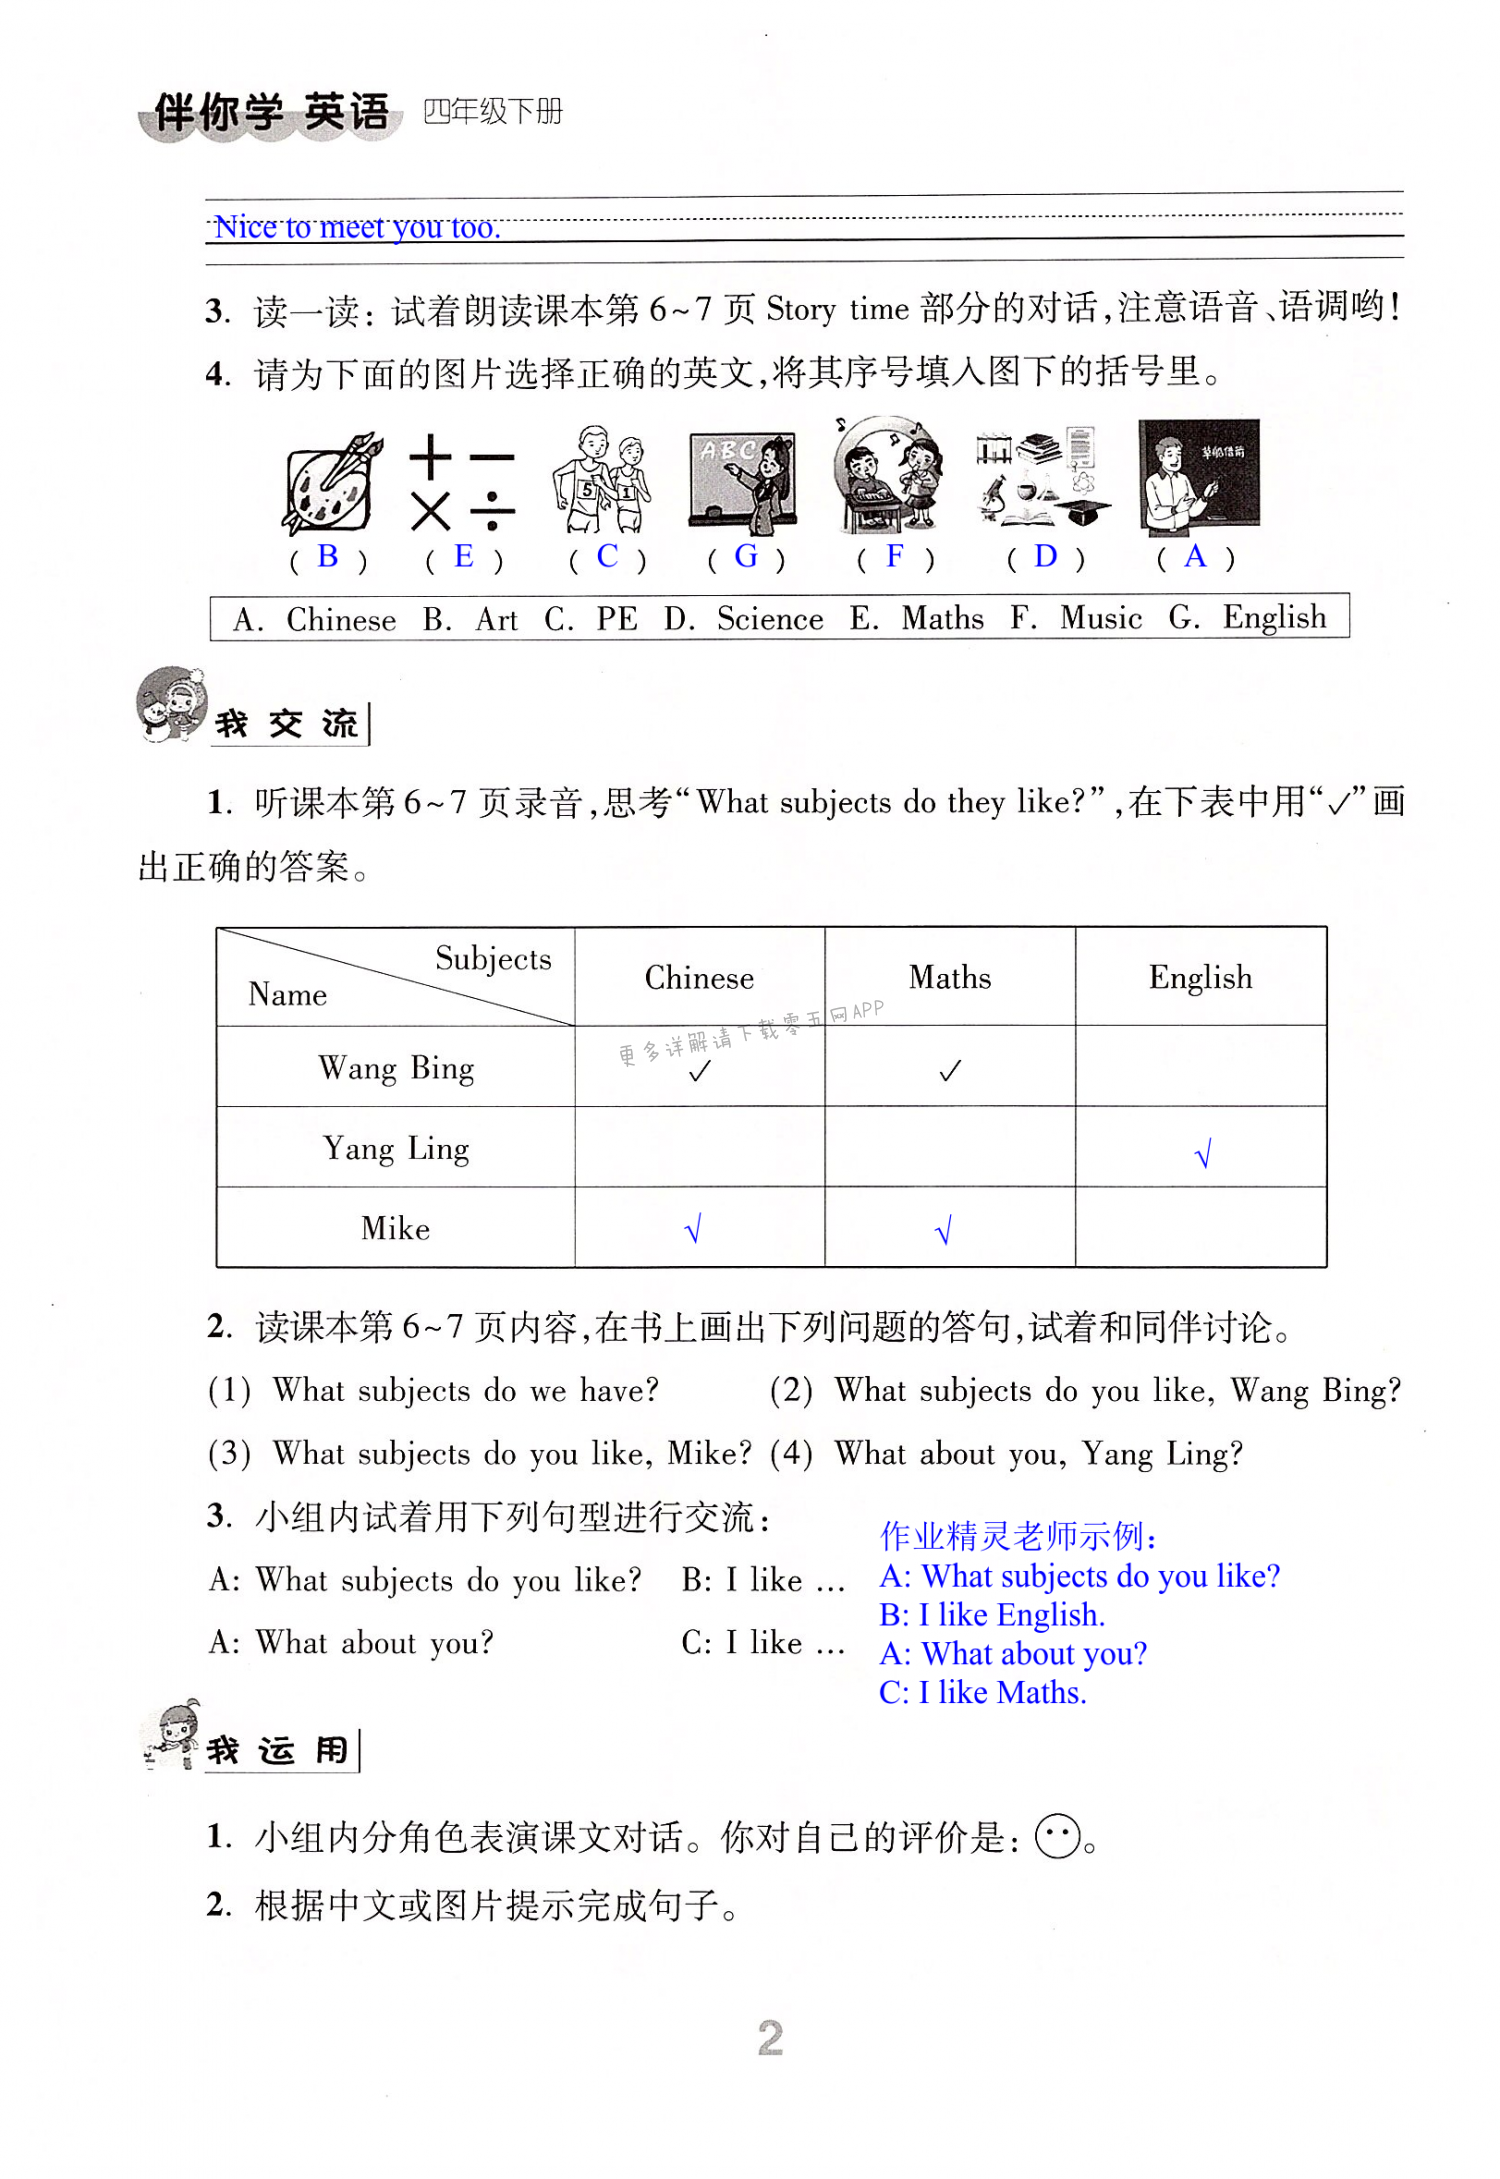 Unit 1 Our school subjects - 第2页